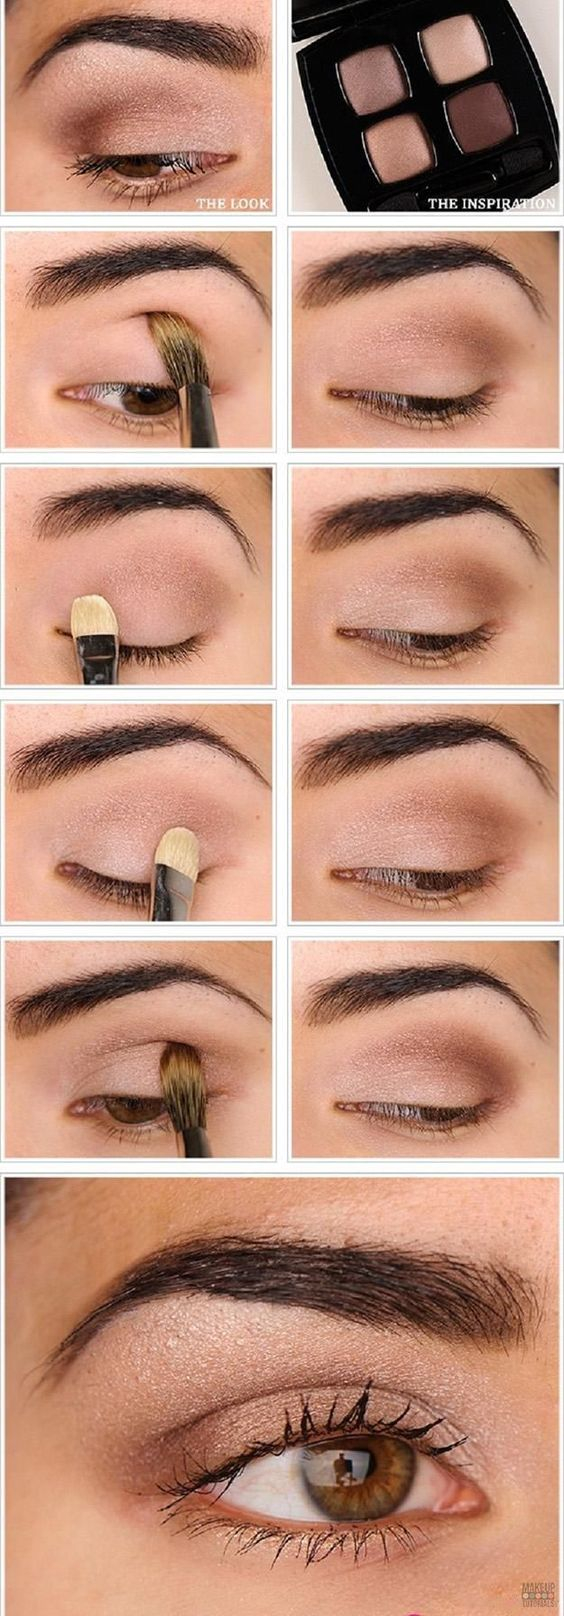 Natural Makeup For Brown Eyes 15 Simple Eye Makeup Ideas For Work Outfits Pretty Designs